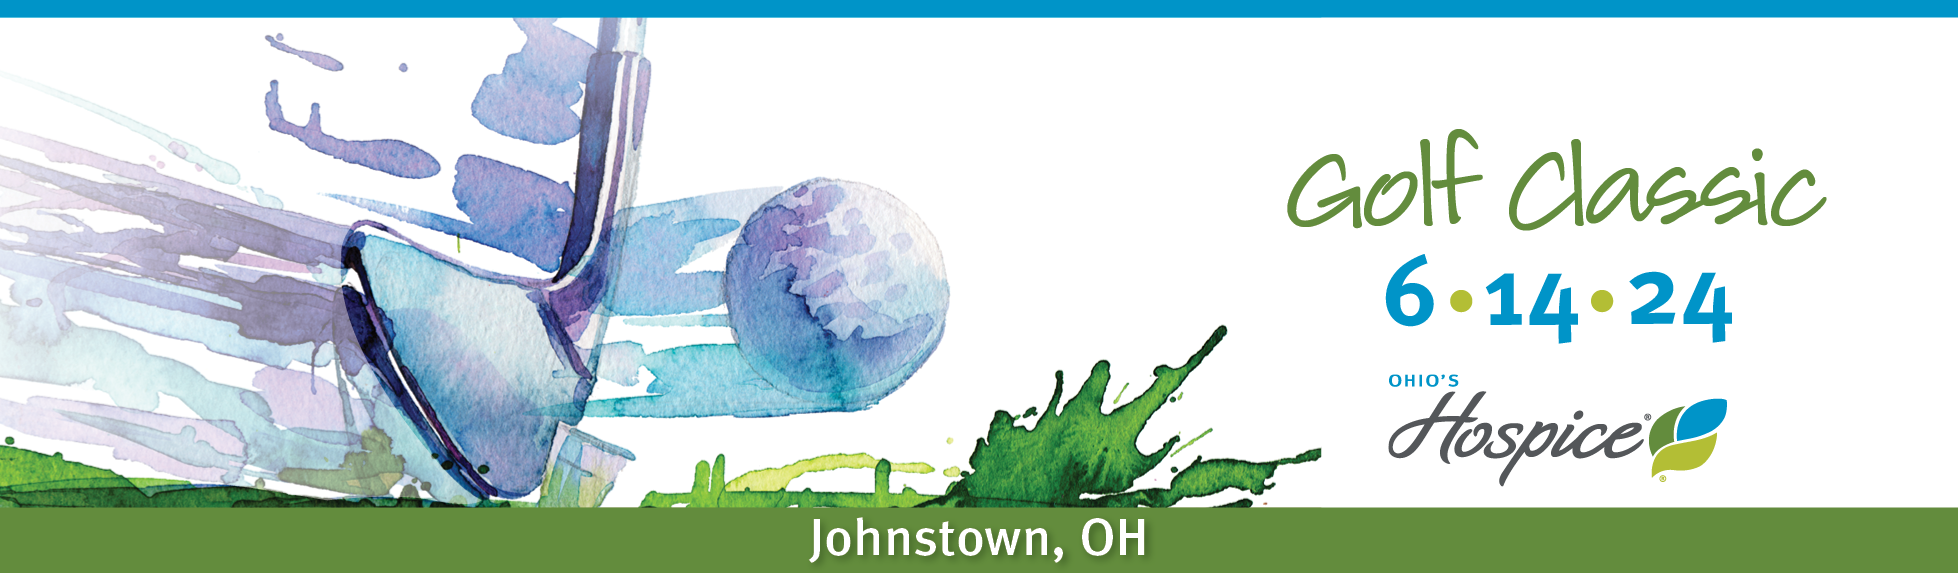 Ohio's Hospice of Central Ohio 2024 Golf Classic 6.14.24 Johnstown, OH